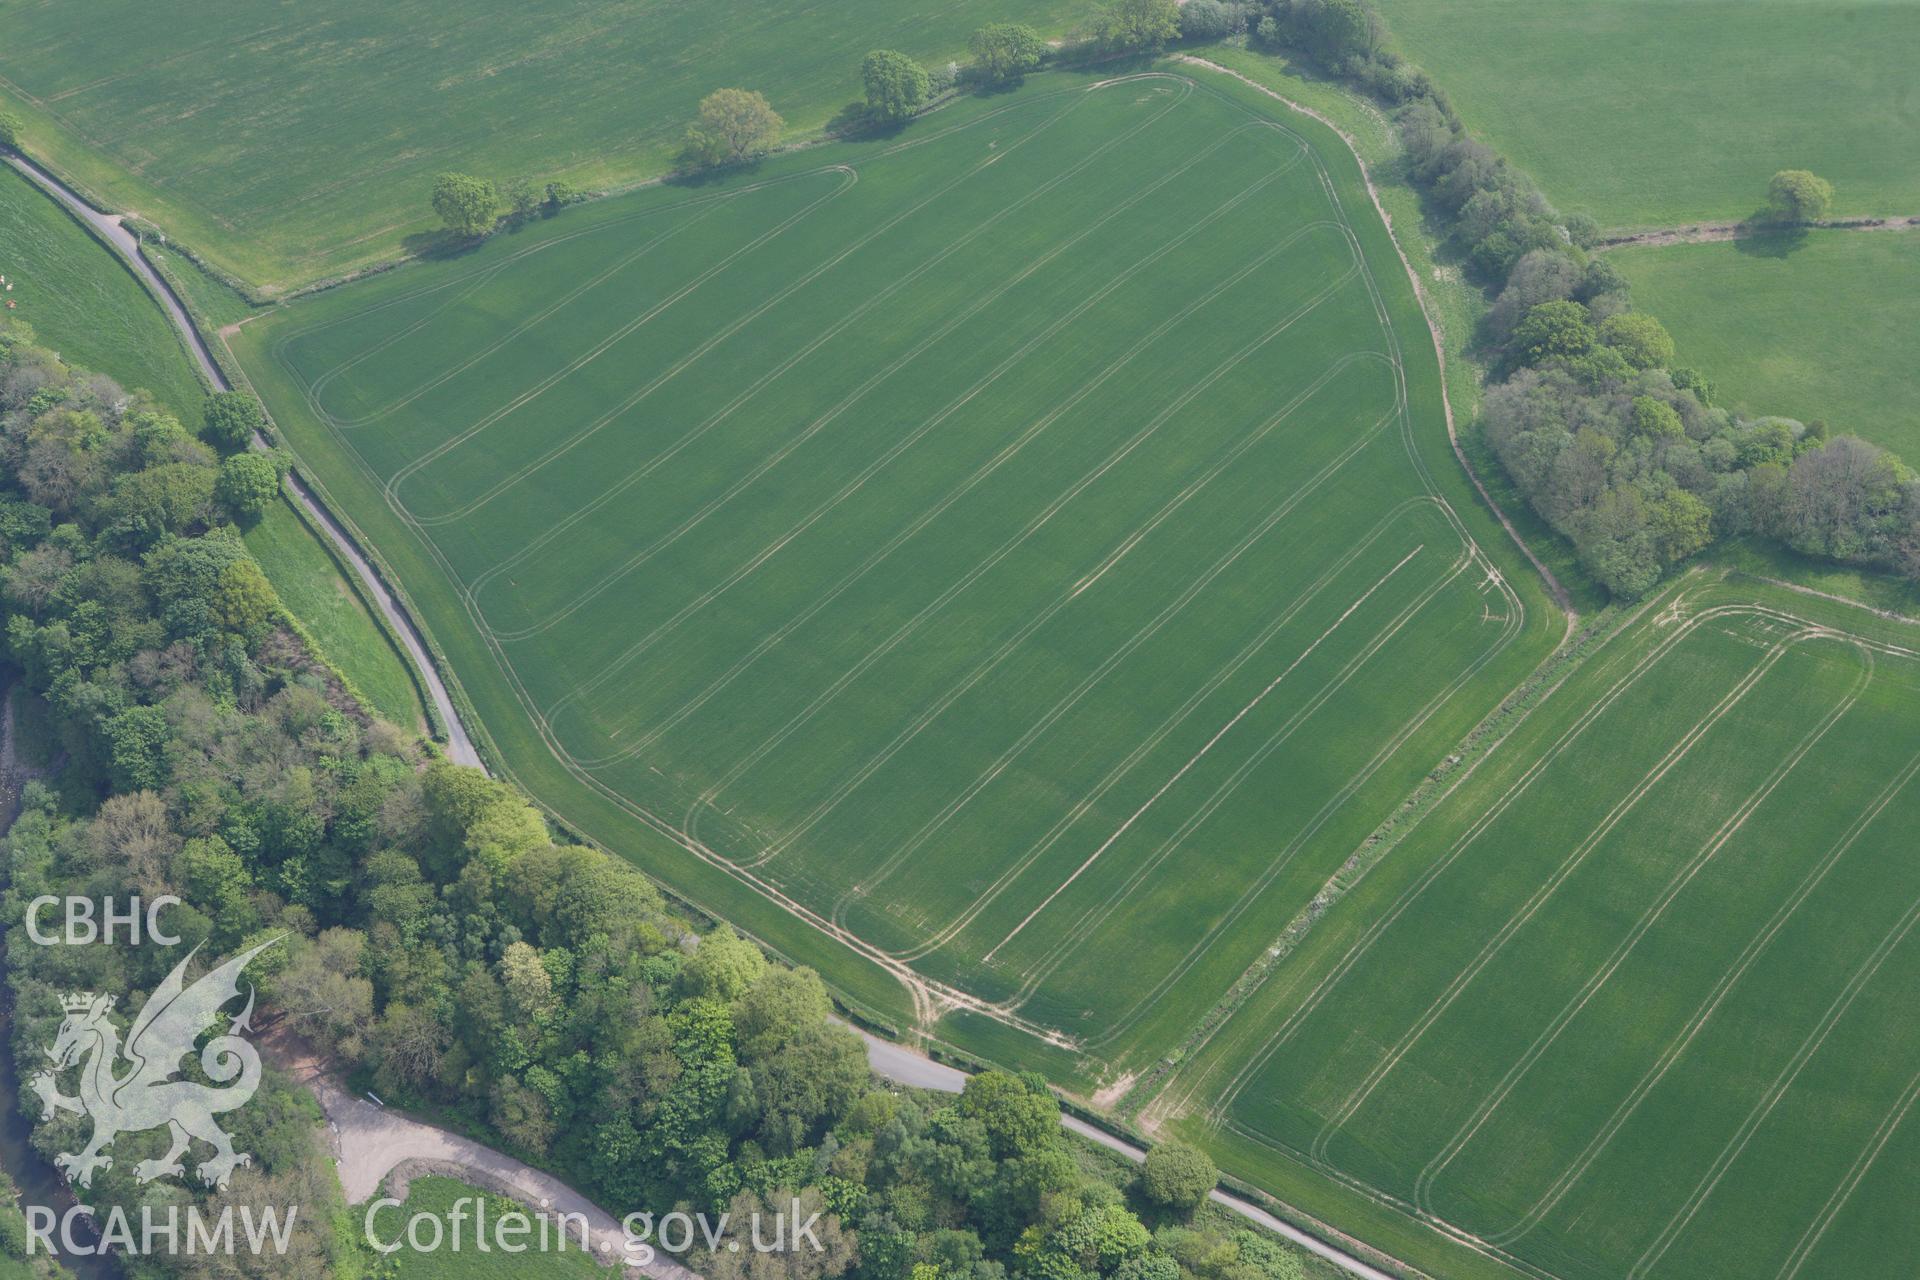 RCAHMW colour oblique photograph of Malthouse Road defended enclosure, cropmark. Taken by Toby Driver on 26/04/2011.